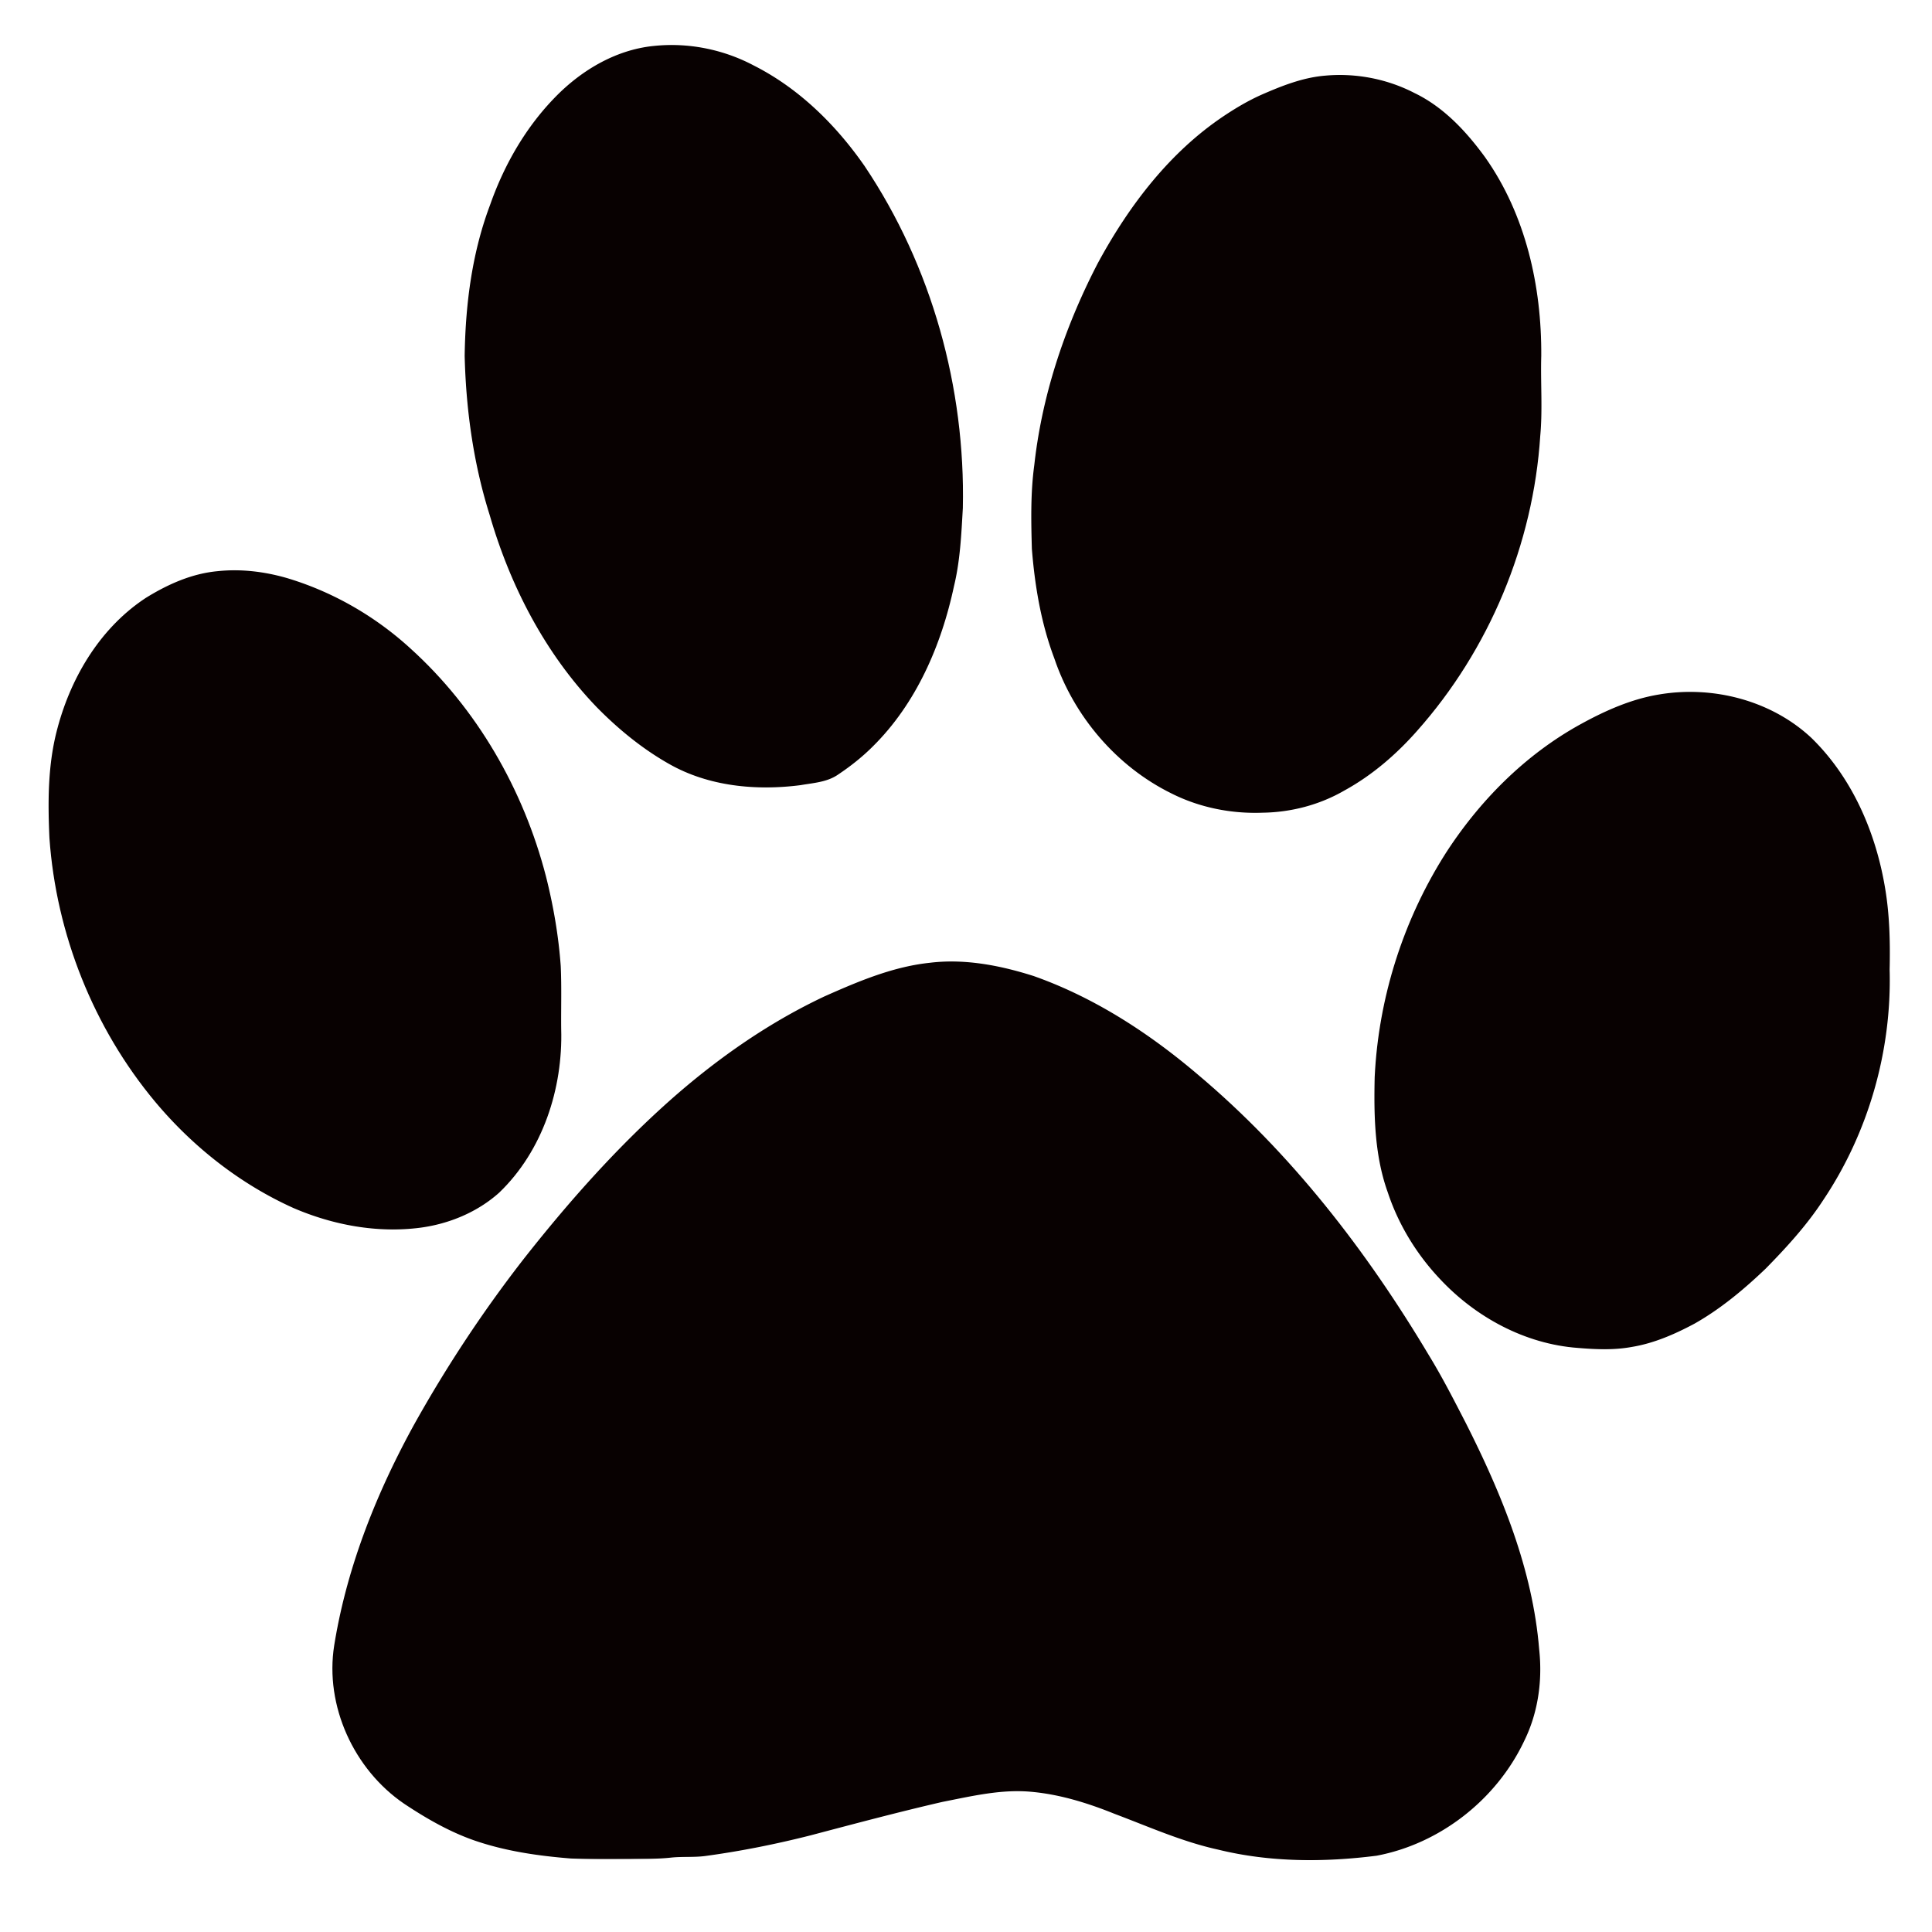 Panther Paw Print Clip Art - Clipart library